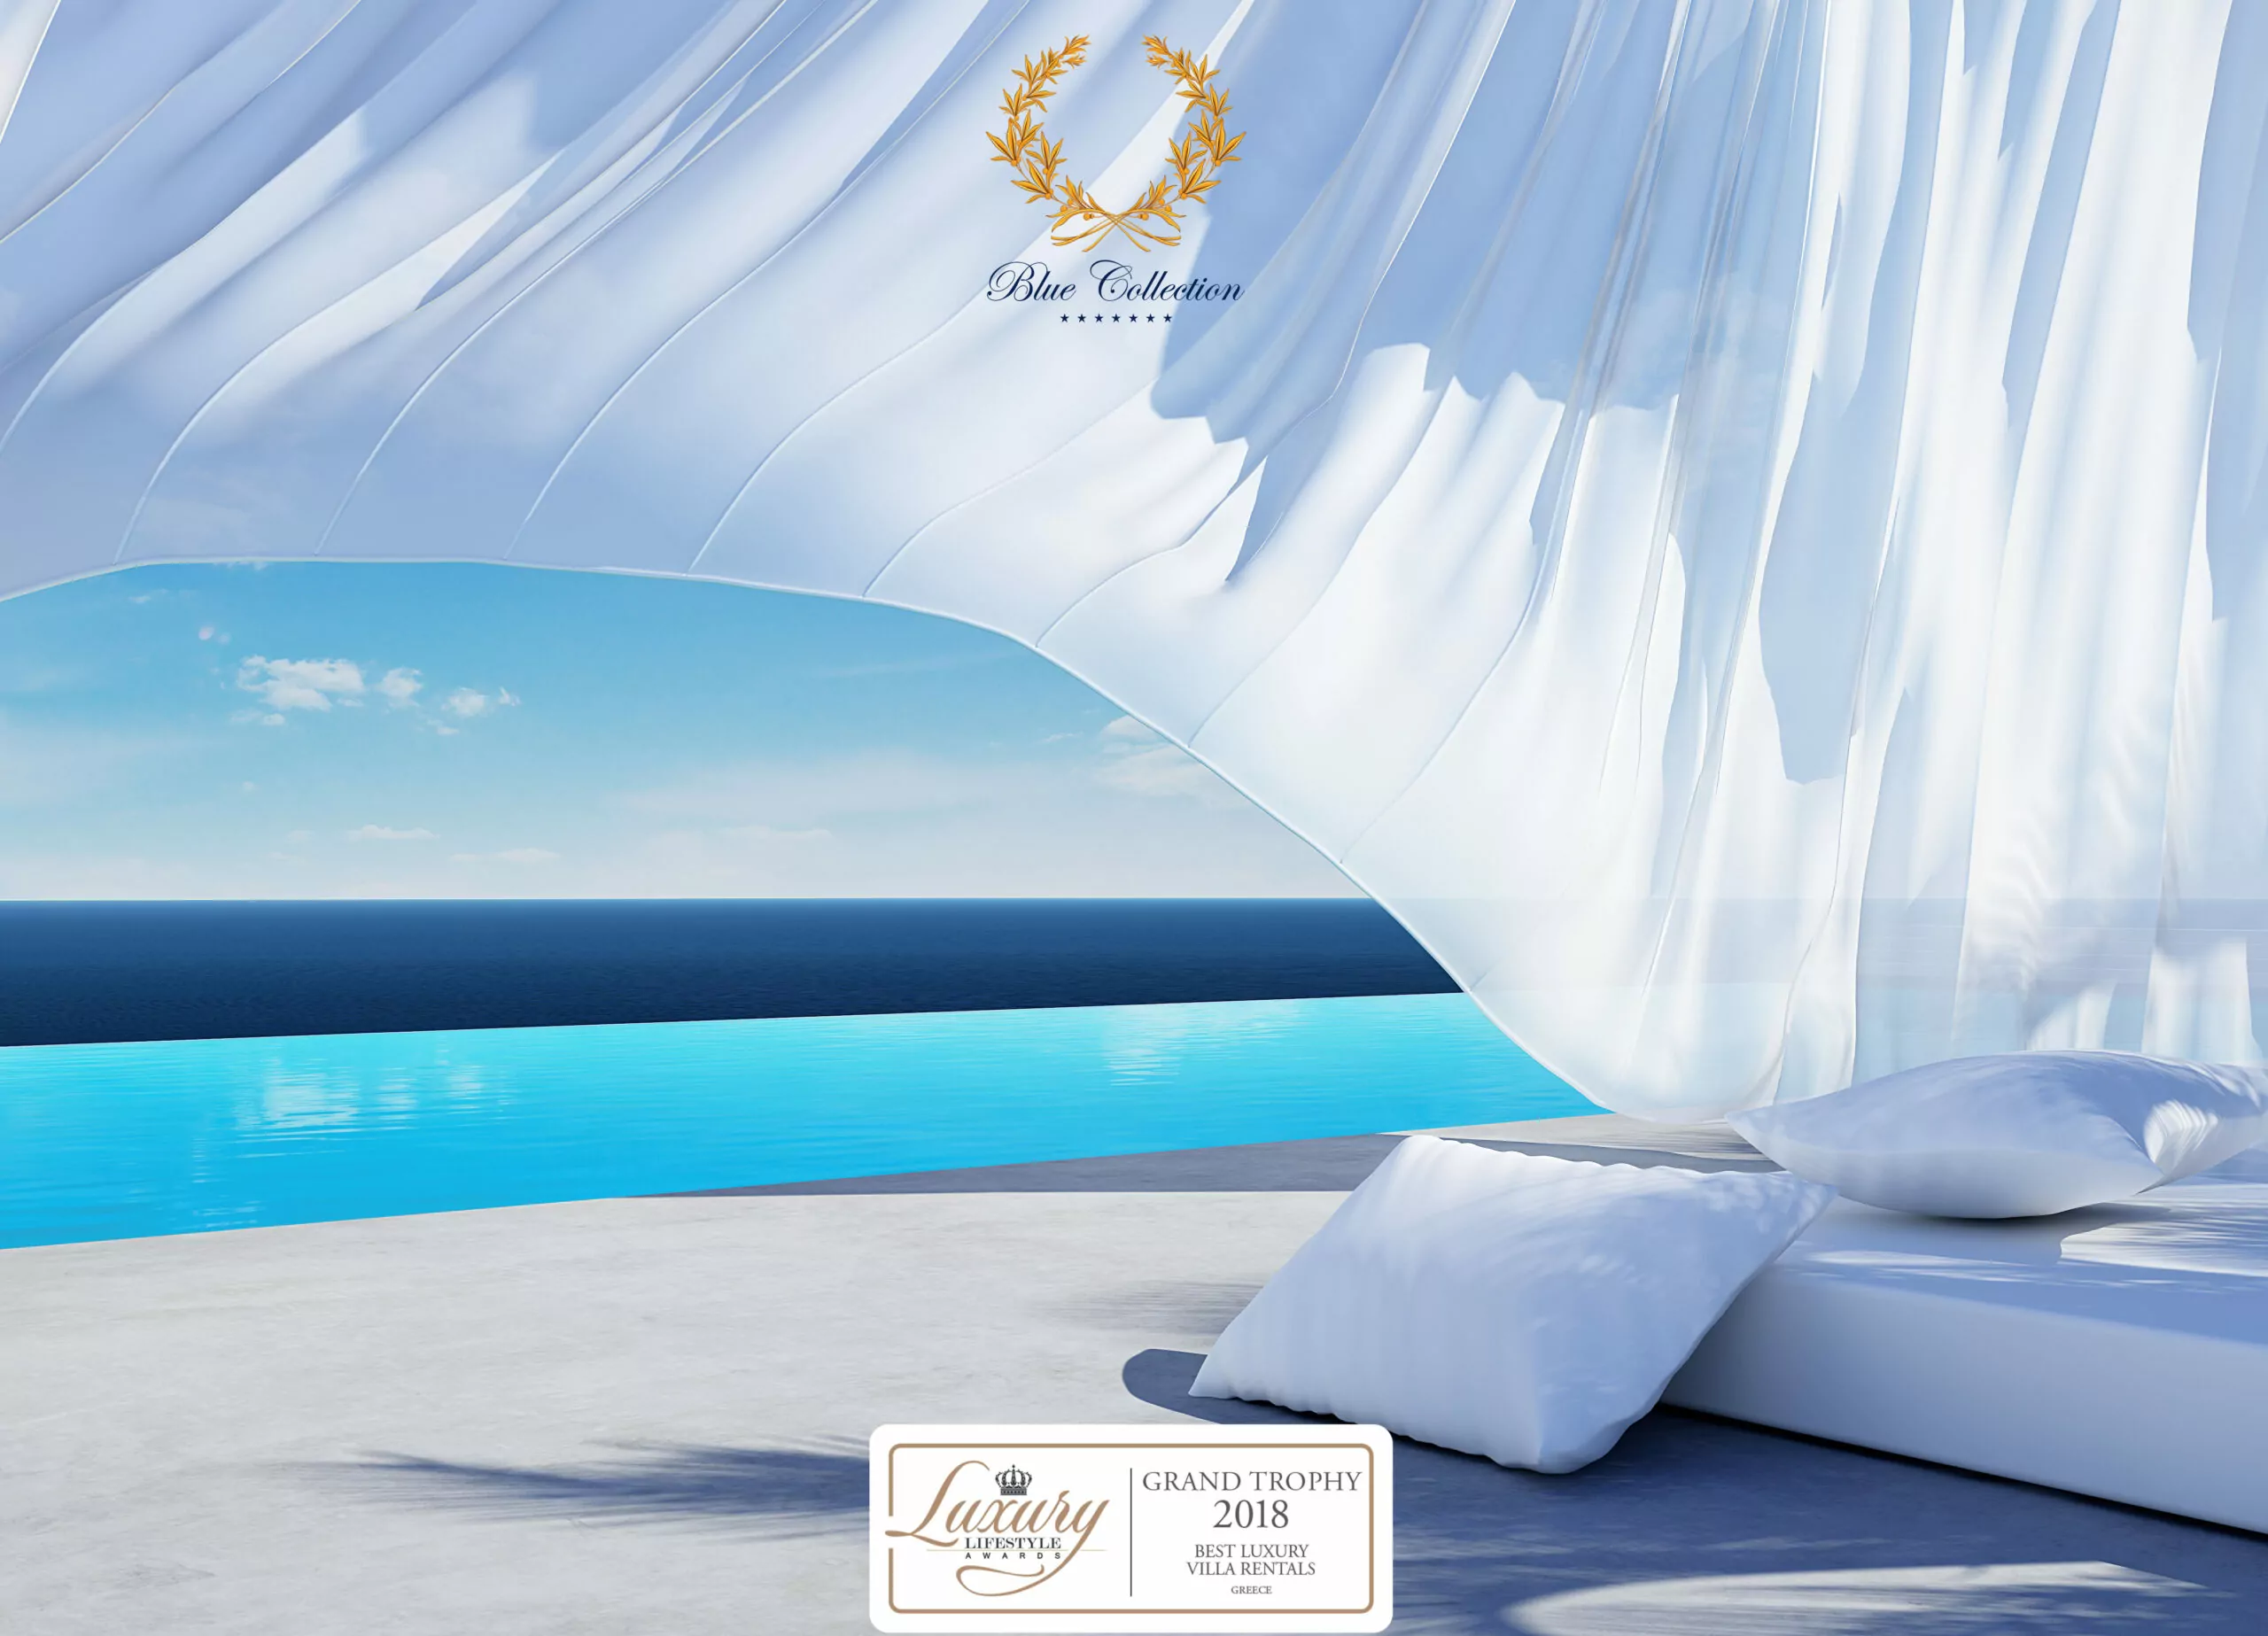 Blue Collection Mykonos became the winner of the International Award of Luxury Lifestyle Awards 2018 in the category of Luxury Villas Rent Service in Greece.